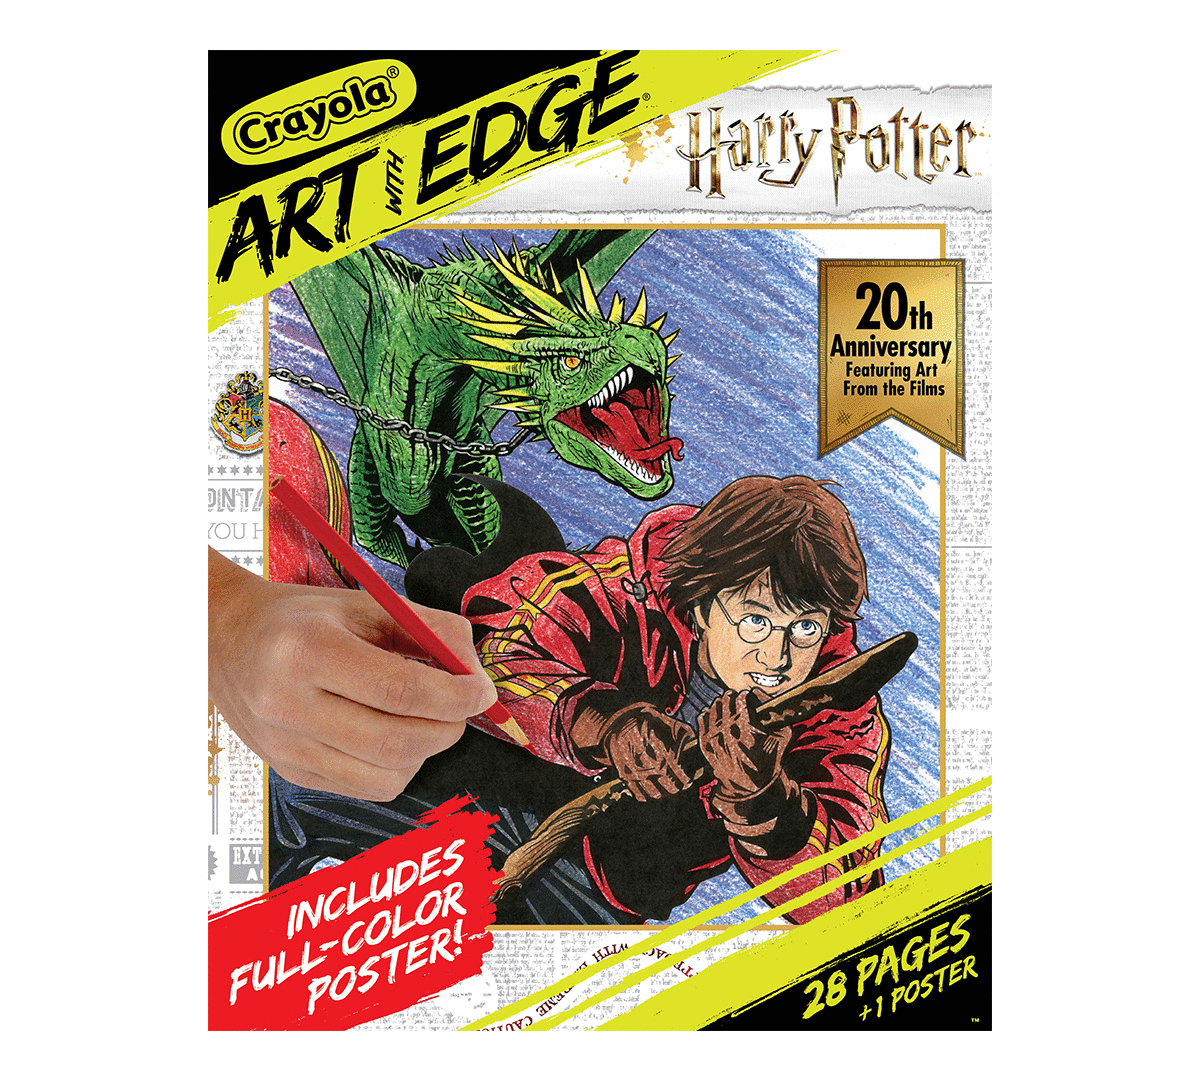 Crayola Art With Edge presents magical coloring action from the wizarding world of Harry Potter! Travel to everyone's favorite fantasy realm with 28 pages of incredibly detailed coloring art celebrating 20 years of Harry Potter movies! Great for Harry Potter fans, young and old and all ages in between.